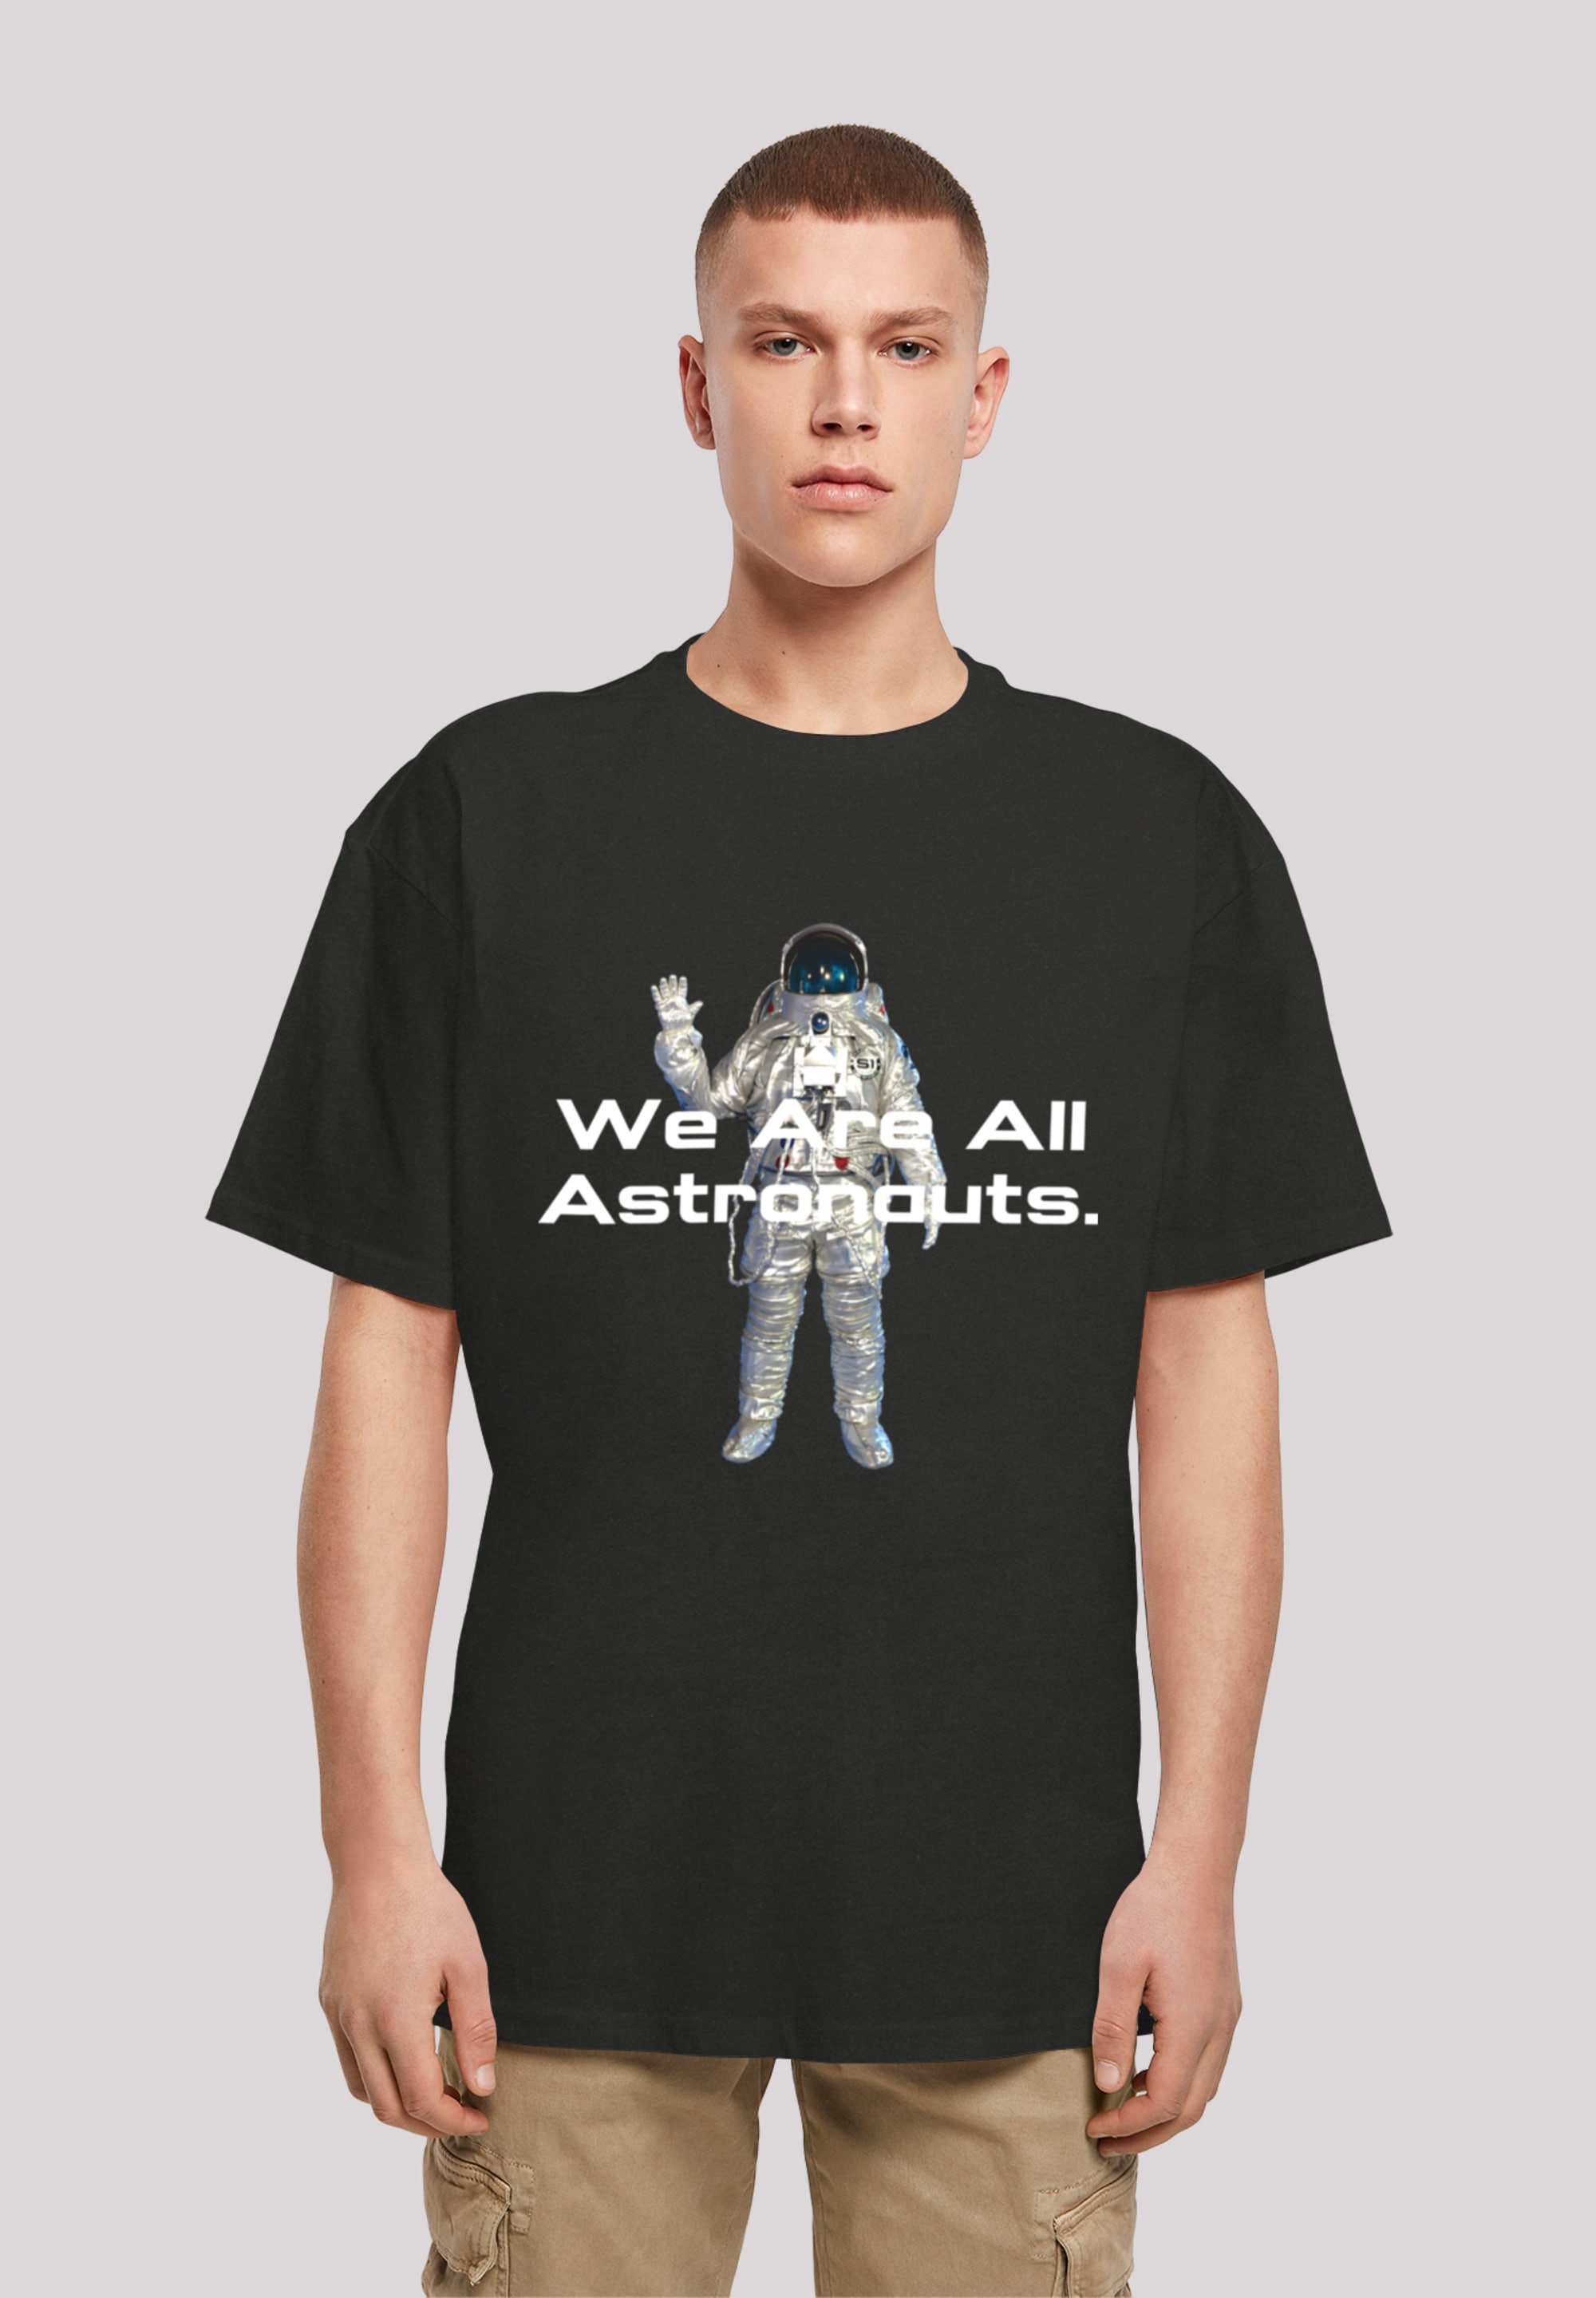 F4NT4STIC T-Shirt »PHIBER SpaceOne astronauts«, ▷ | We all BAUR Print are kaufen